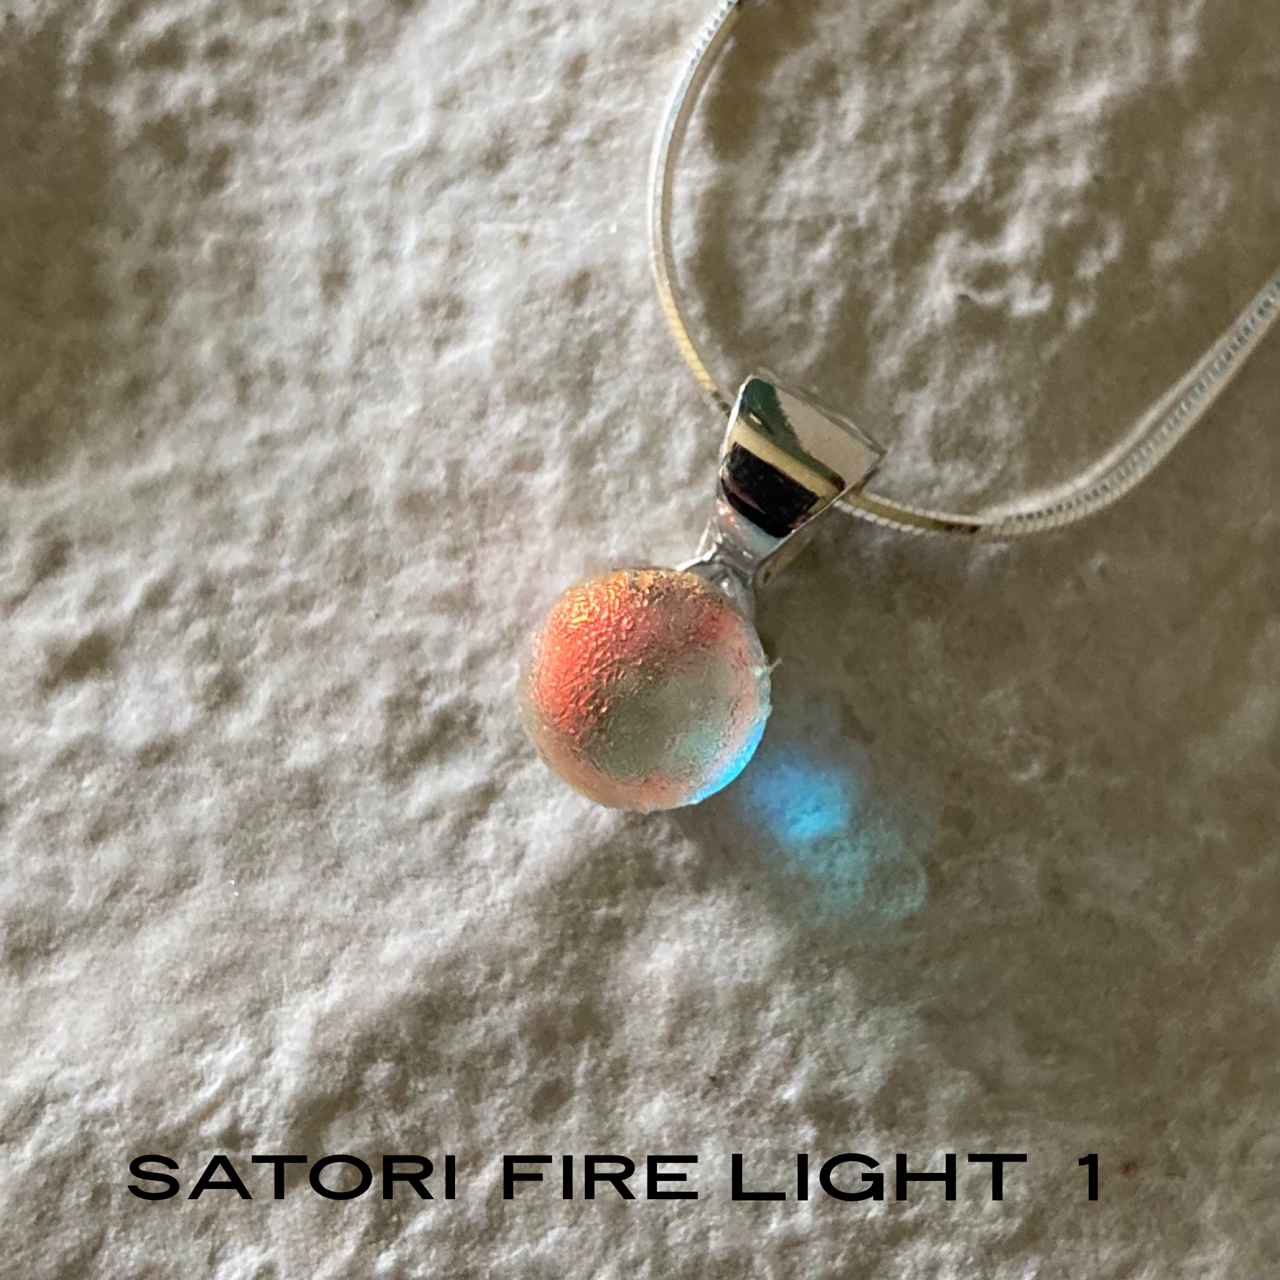 BEST SELLER Good Chi™ Charm Necklace for Positive Energy – Satori Fire Glass